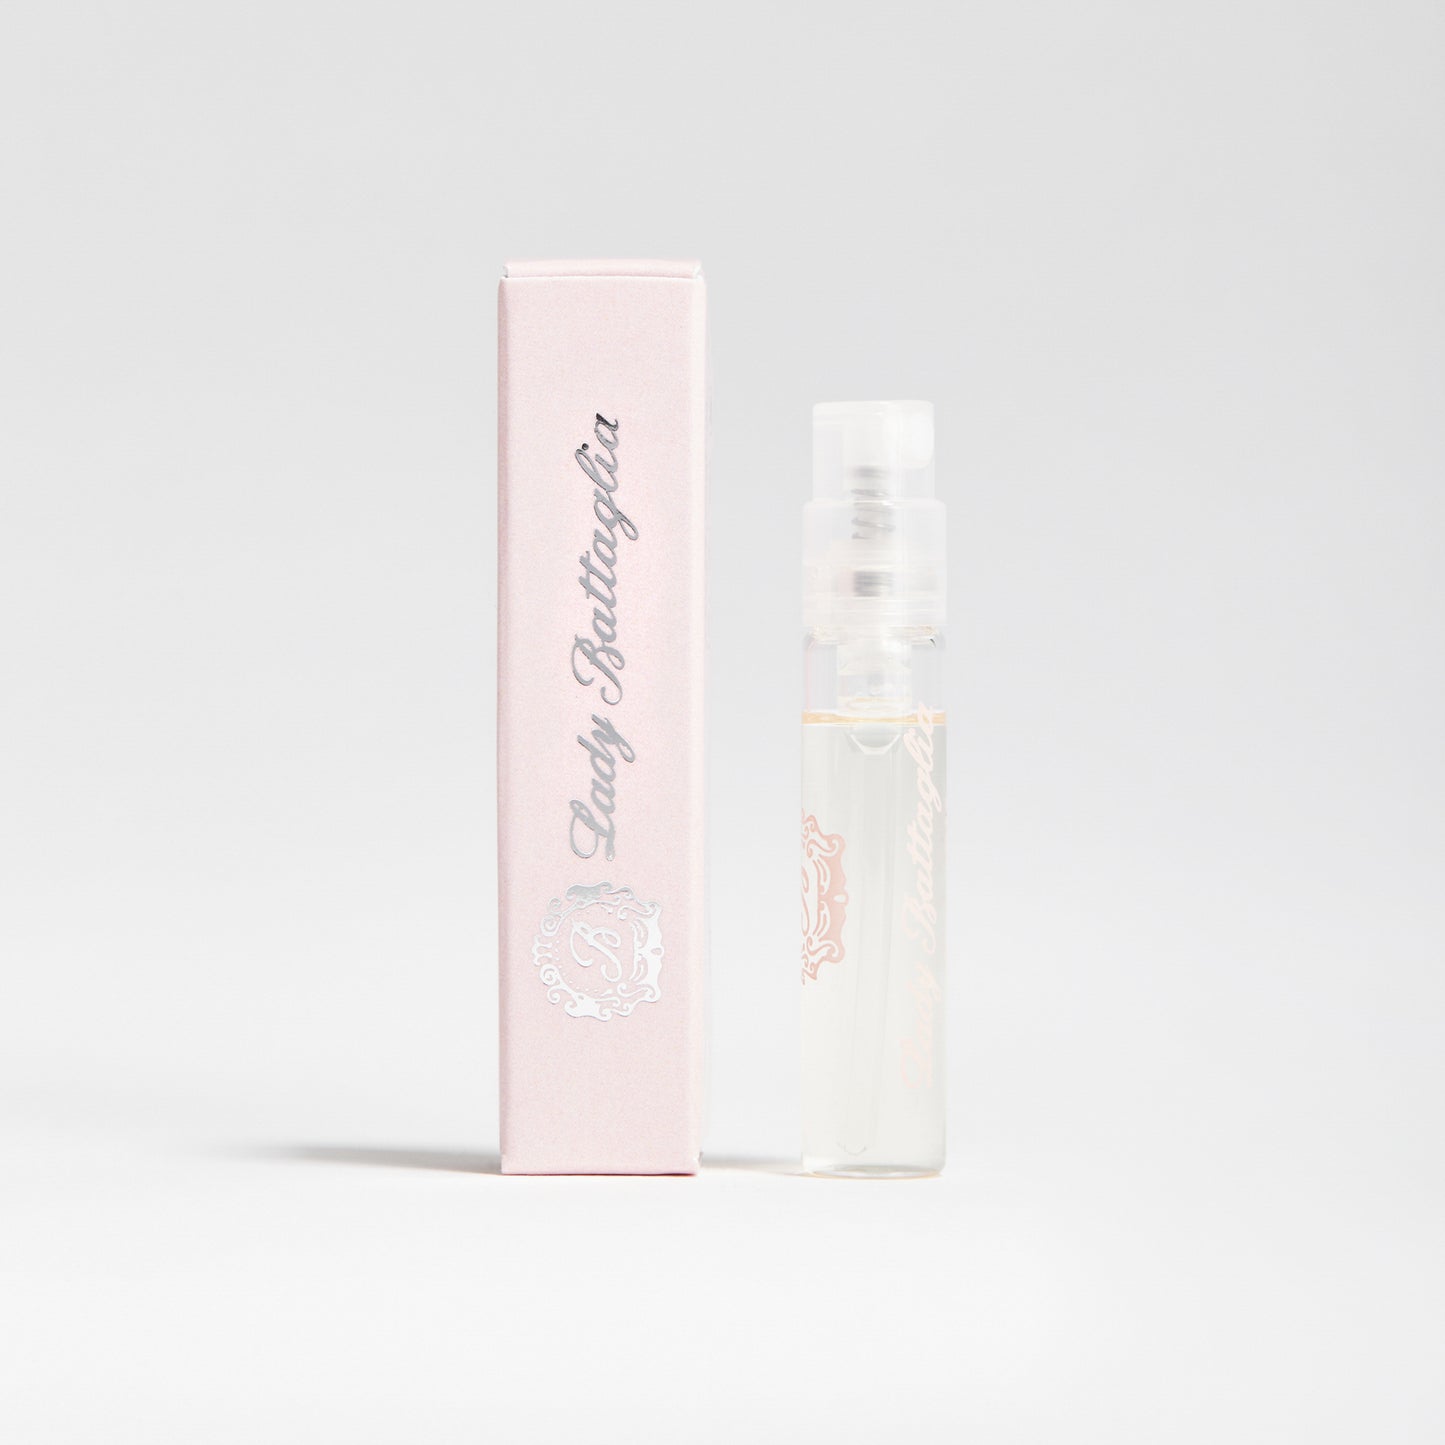 A photo of the Lady Battaglia fragrance sample by Battaglia. The sample is standing upright next to the pink box it is packaged in against a white background. 